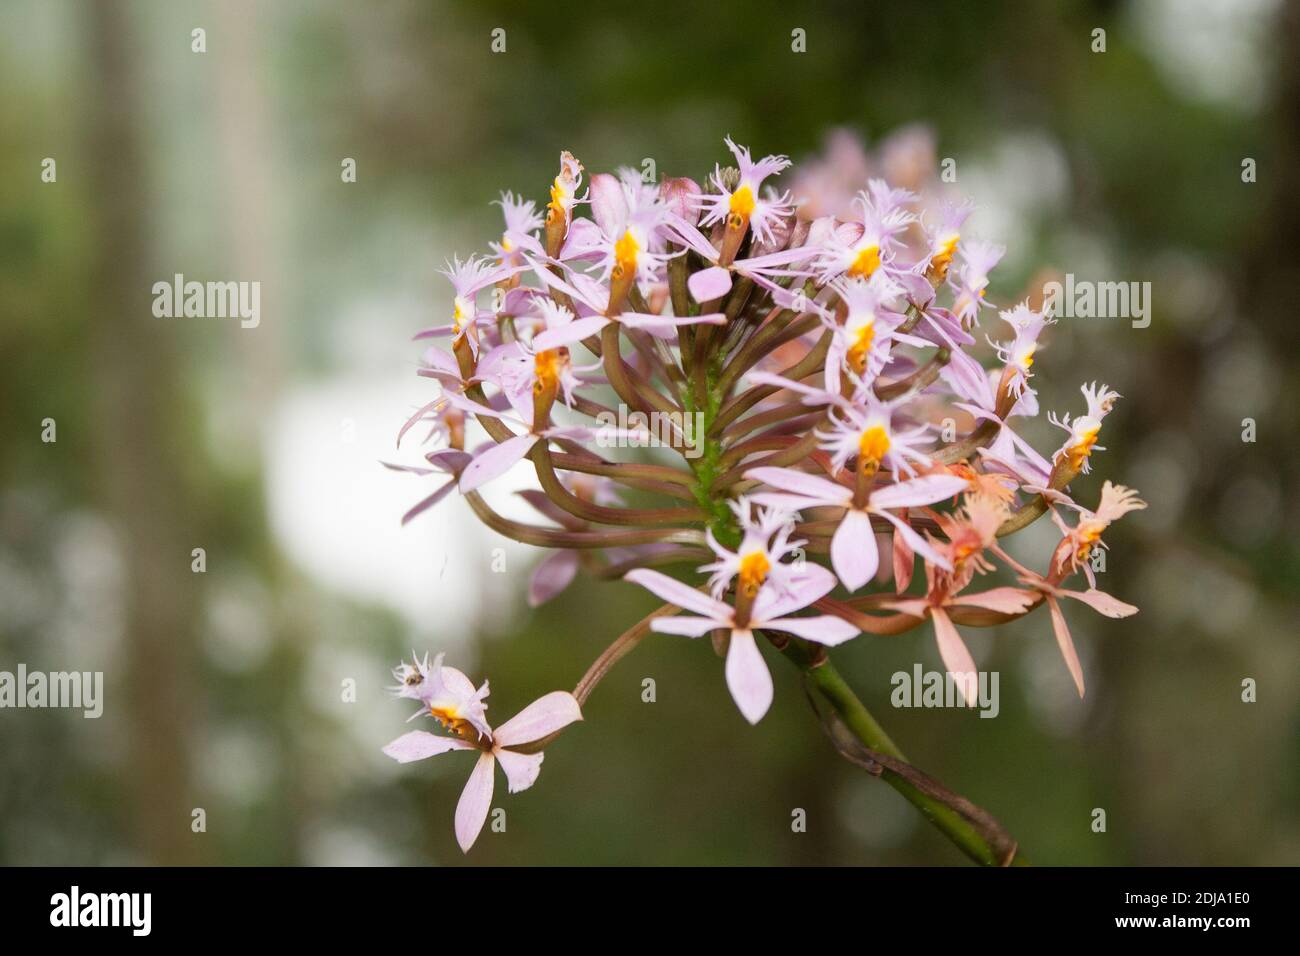 A selective focus shot of beautiful epidendrum secundum flowers in the garden Stock Photo